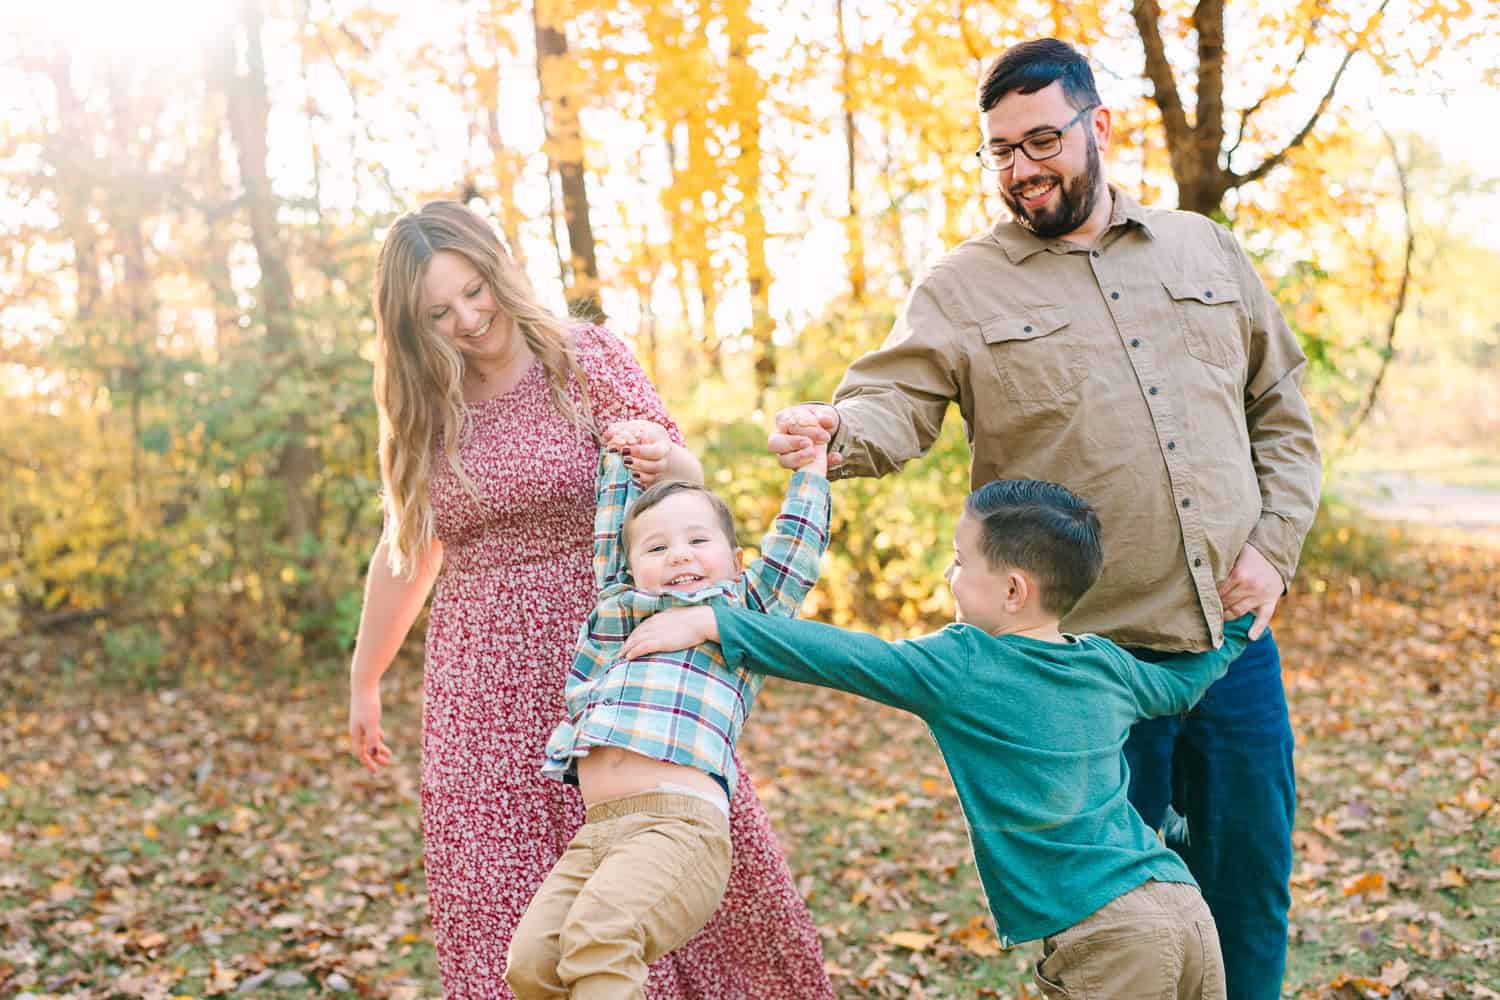 A family plays together in a park in front of autumn trees, captured during a fall mini session by Daisy Zimmer Photography